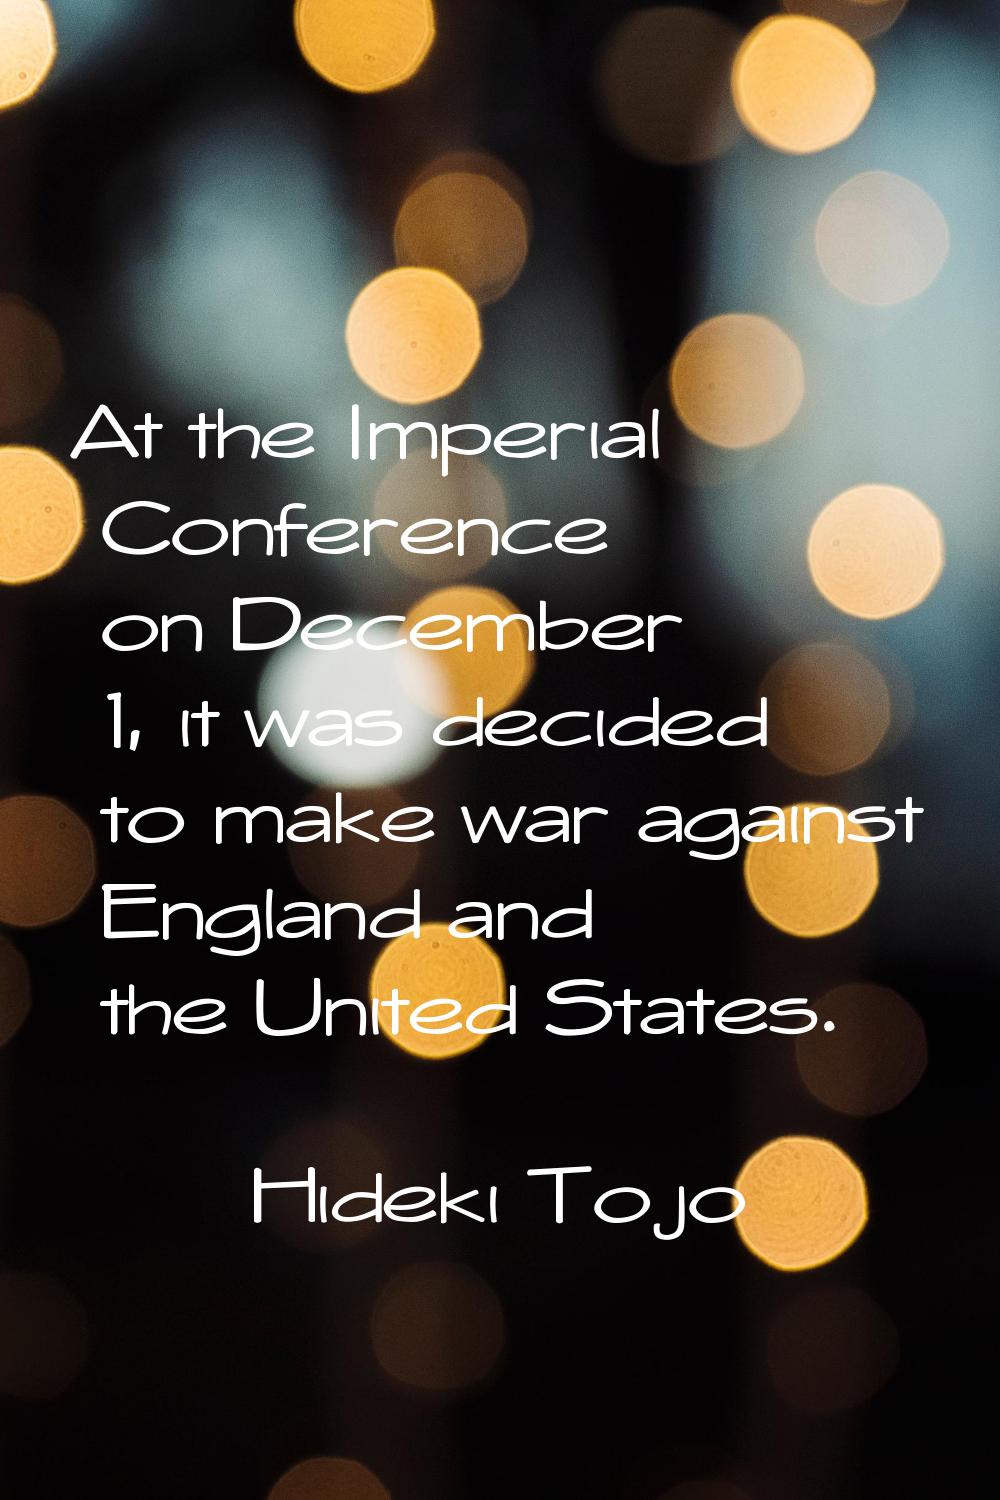 At the Imperial Conference on December 1, it was decided to make war against England and the United